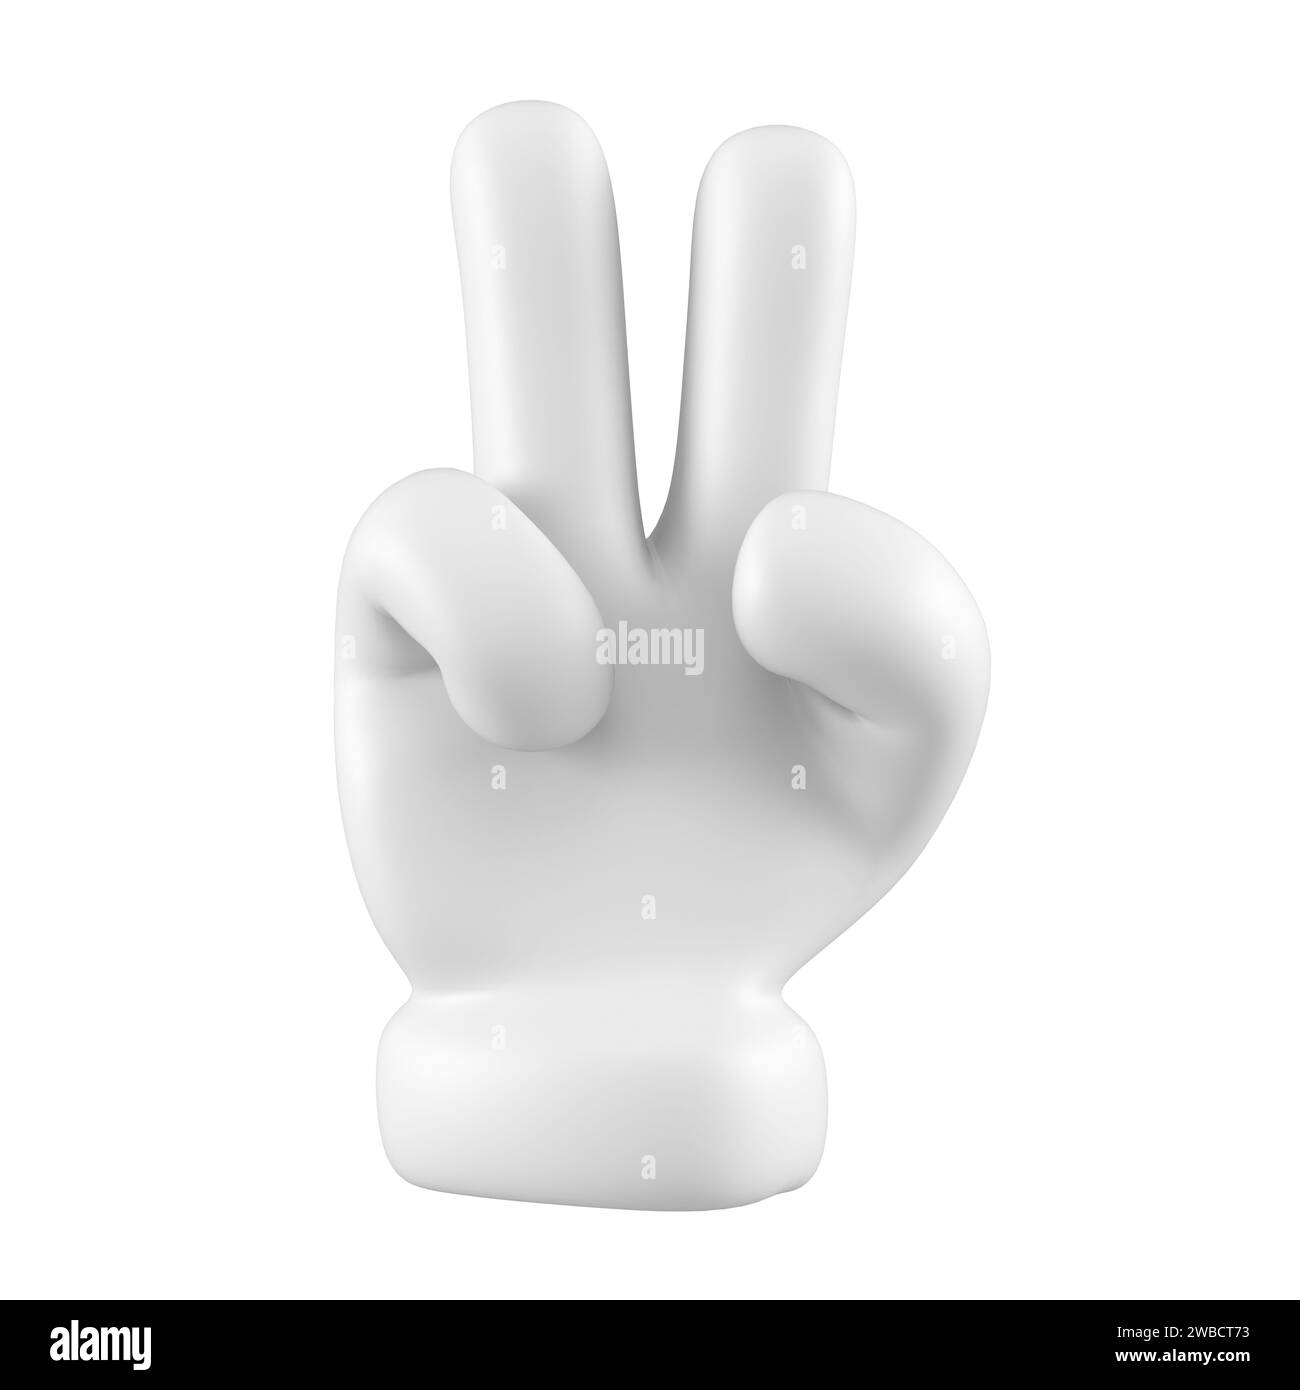 White emoji cute peace gesture isolated. Character hand icon, symbol, signal and sign. 3d rendering. Stock Photo